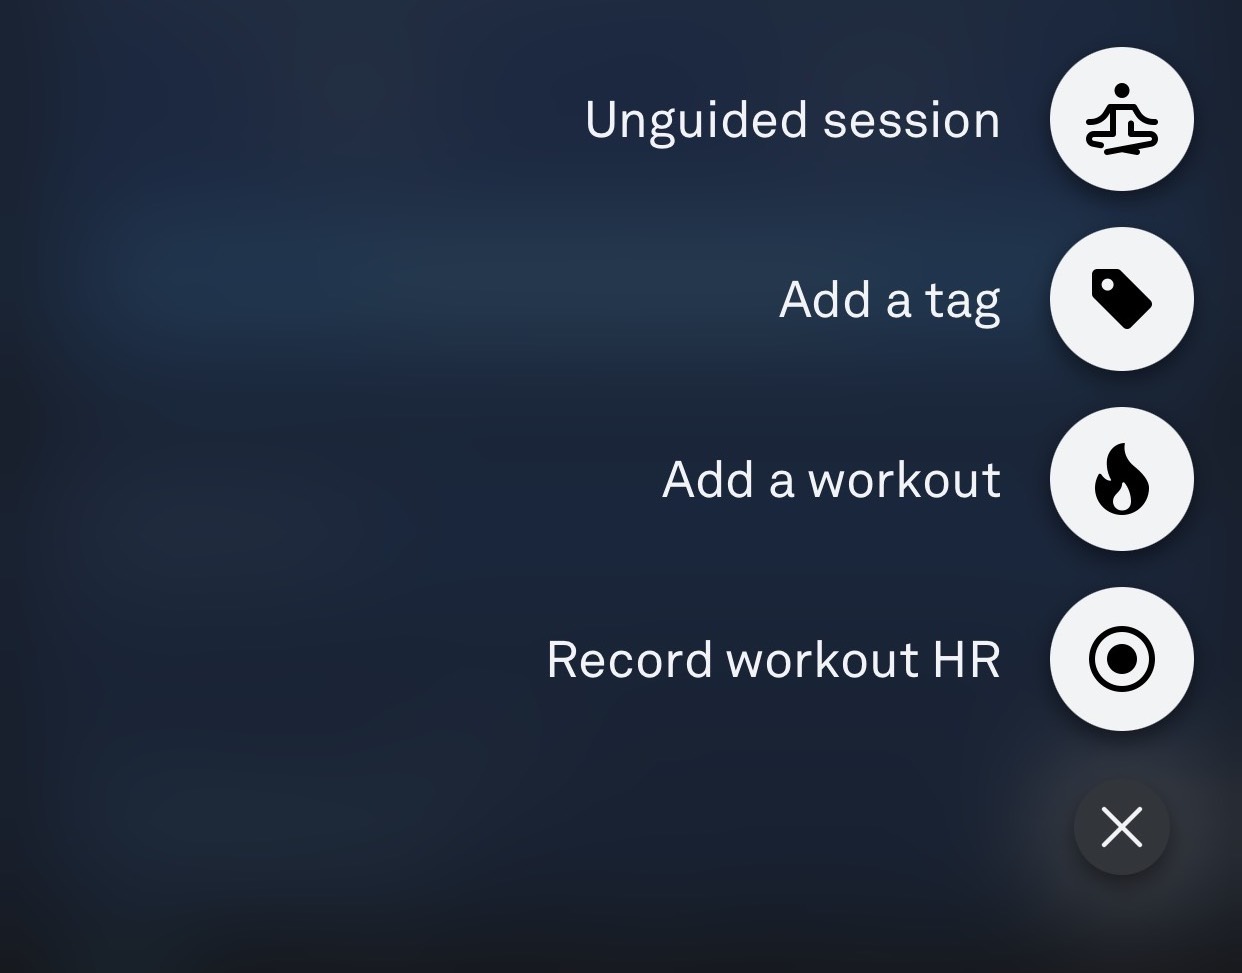 the action menu as it appears when you press the + button in the lower right corner of the Oura App. The four menu options are unguided session, add a tag, add a workout, and record workout HR